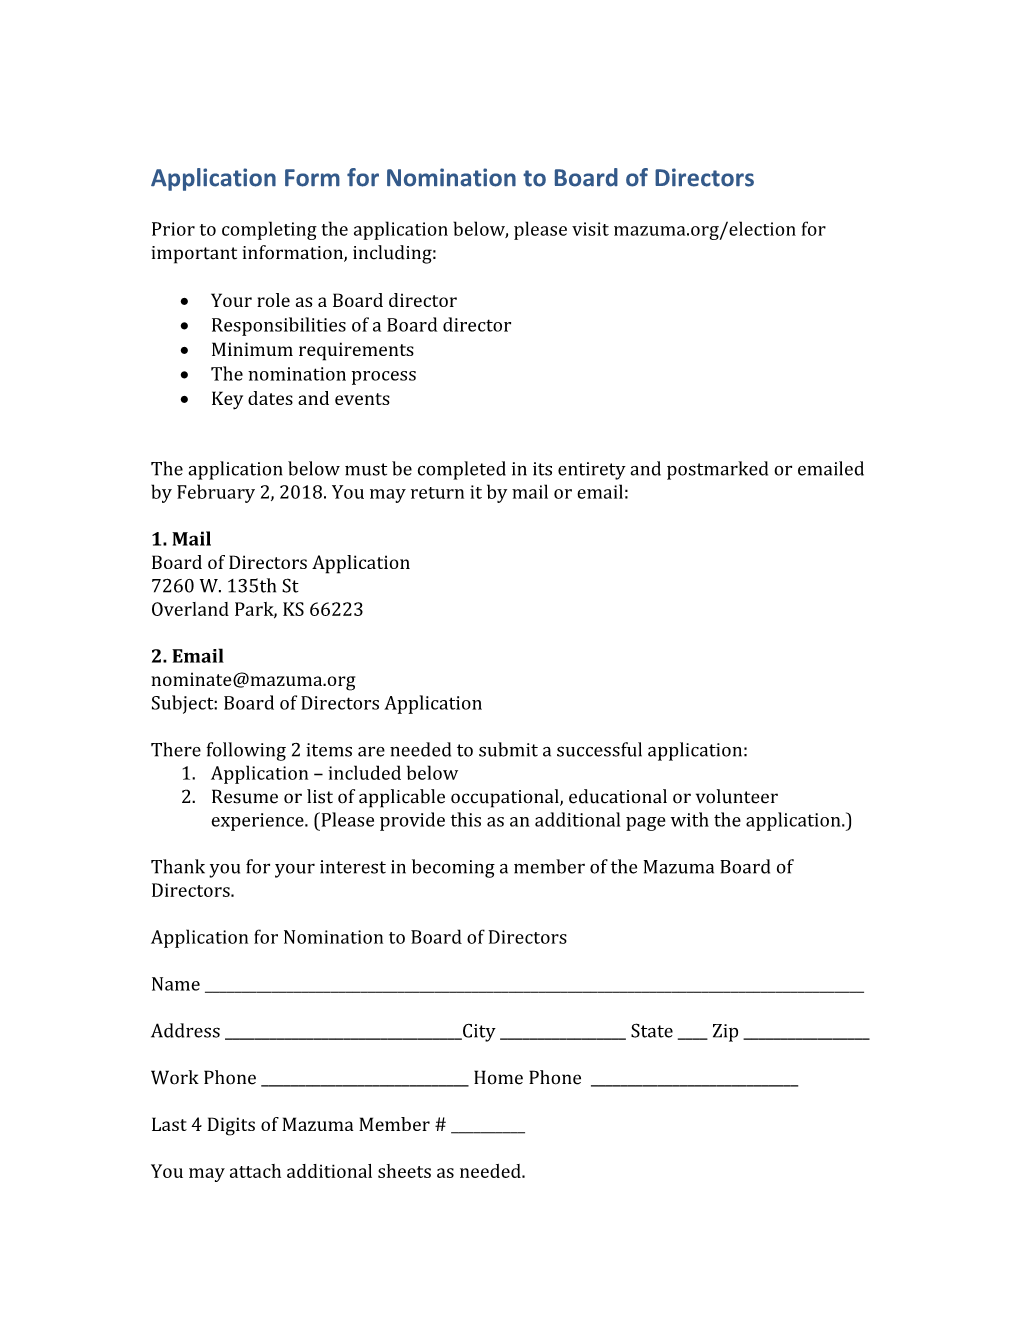 Application Form for Nomination to Board of Directors